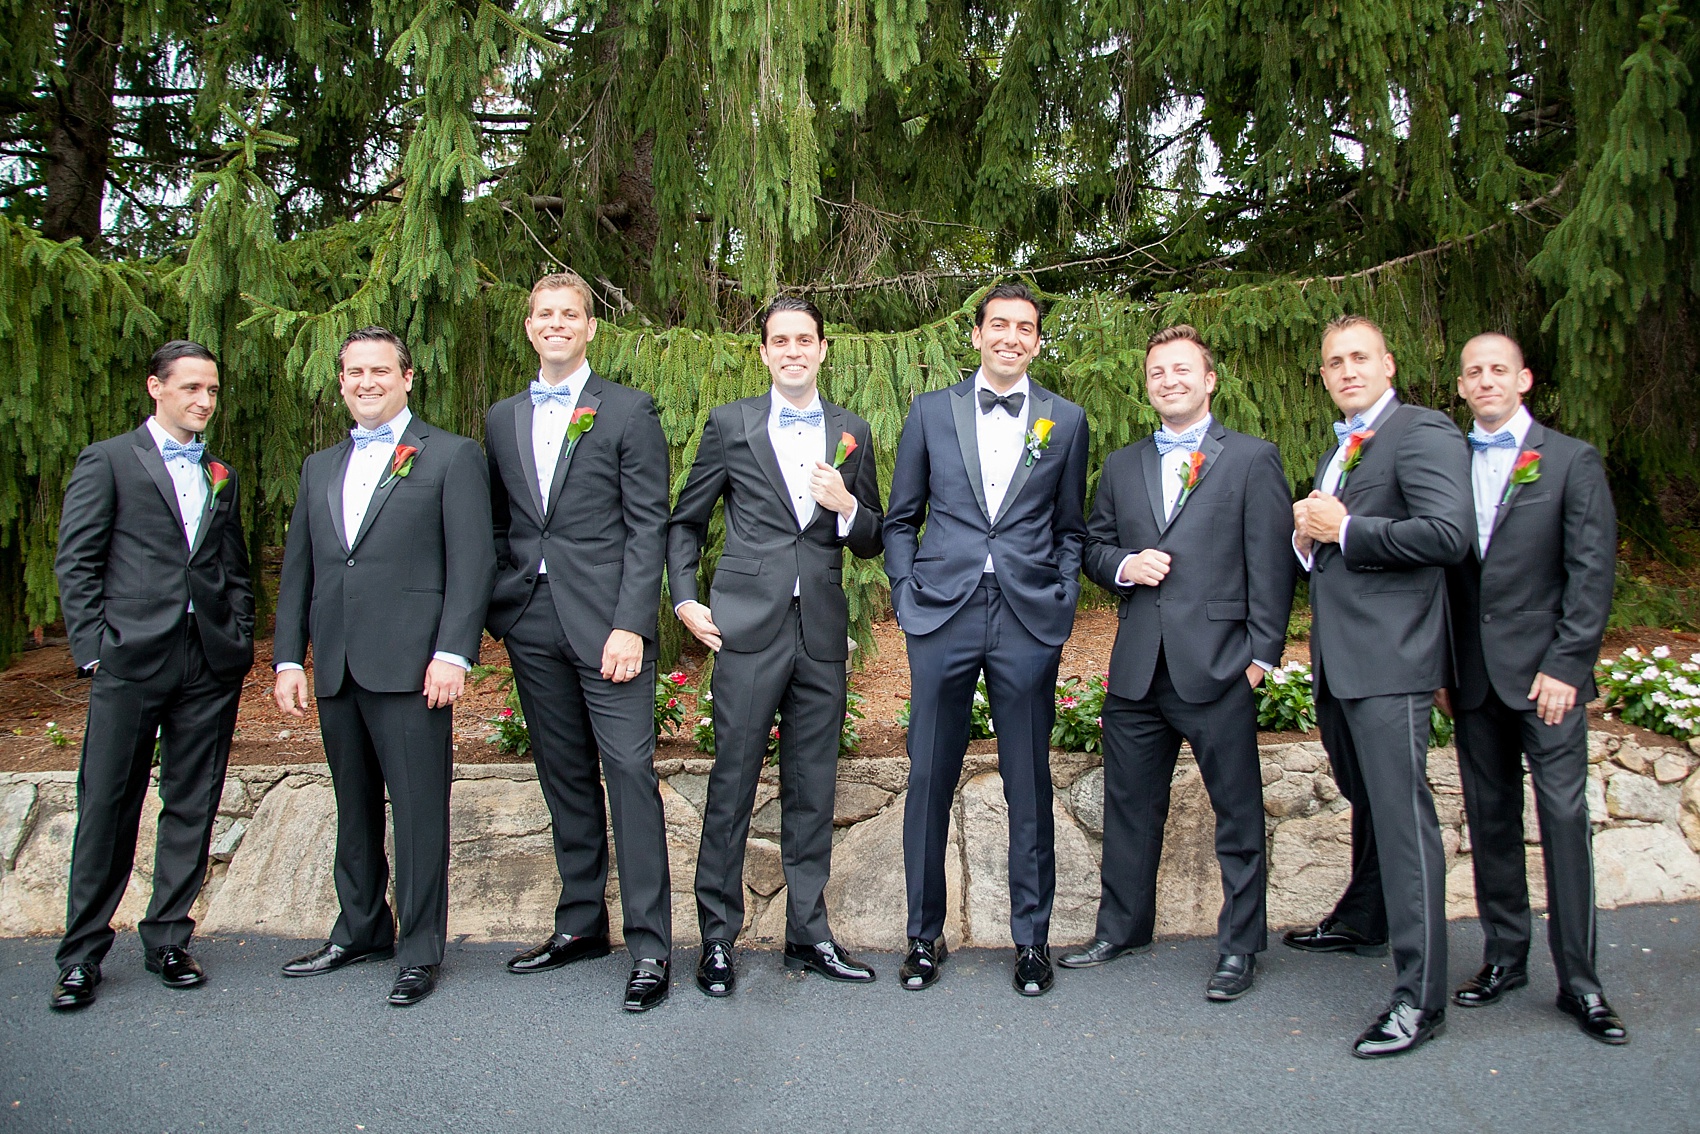 Perona Farms wedding photos groomsmen in navy and black tuxedos for a colorful summer celebration. Pictures by New Jersey photographer Mikkel Paige Photography.